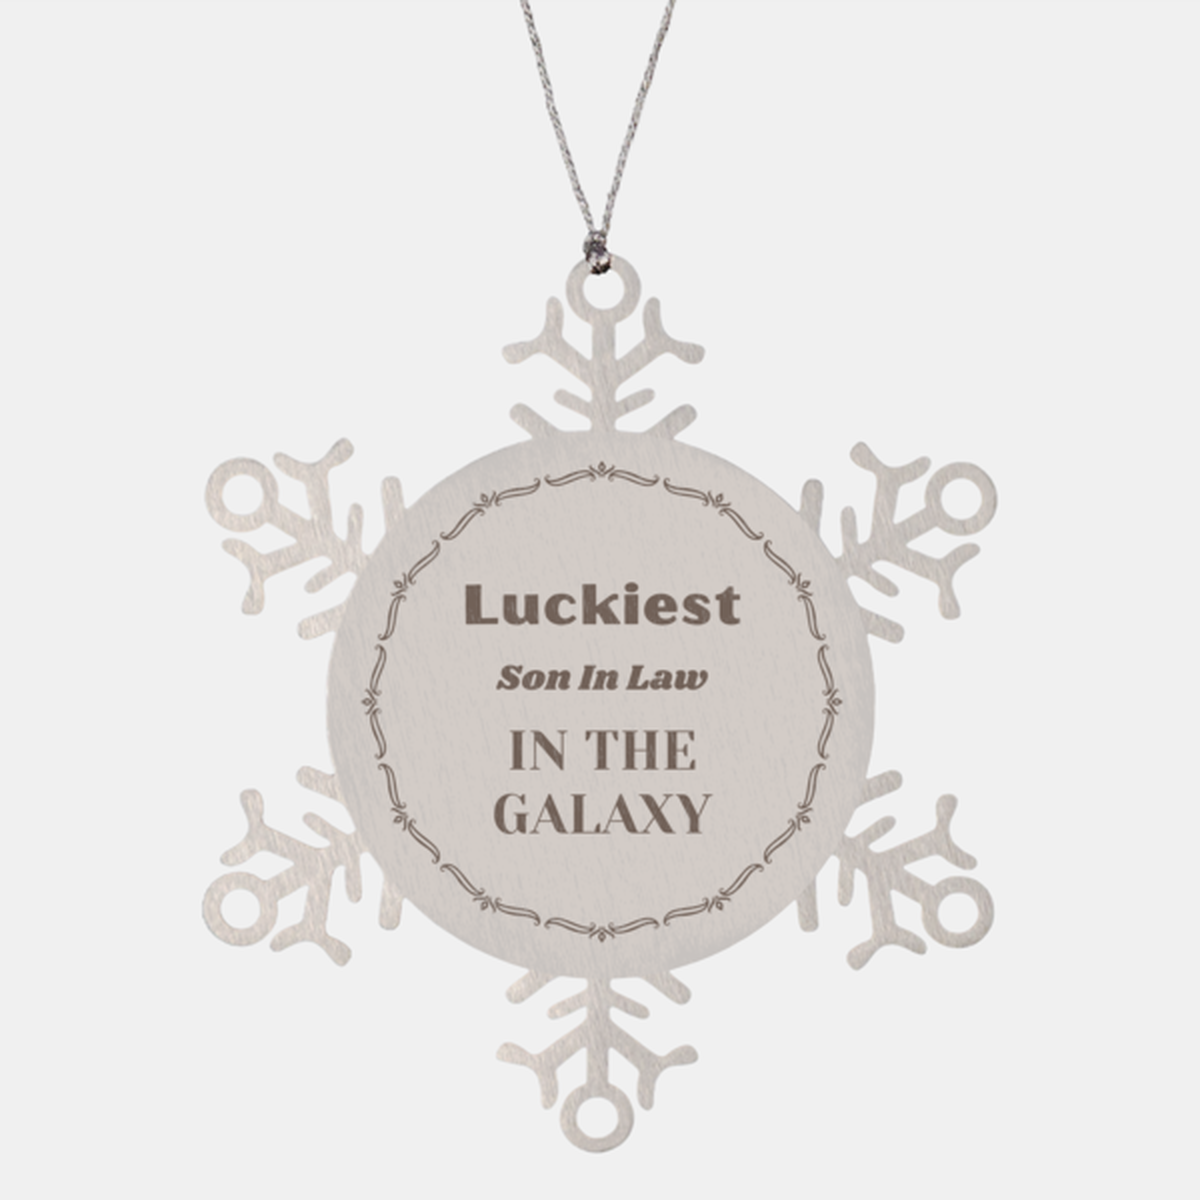 Luckiest Son In Law in the Galaxy, To My Son In Law Ornament Gifts, Christmas Son In Law Snowflake Ornament Gifts, X-mas Decorations Unique Gifts For Son In Law Men Women